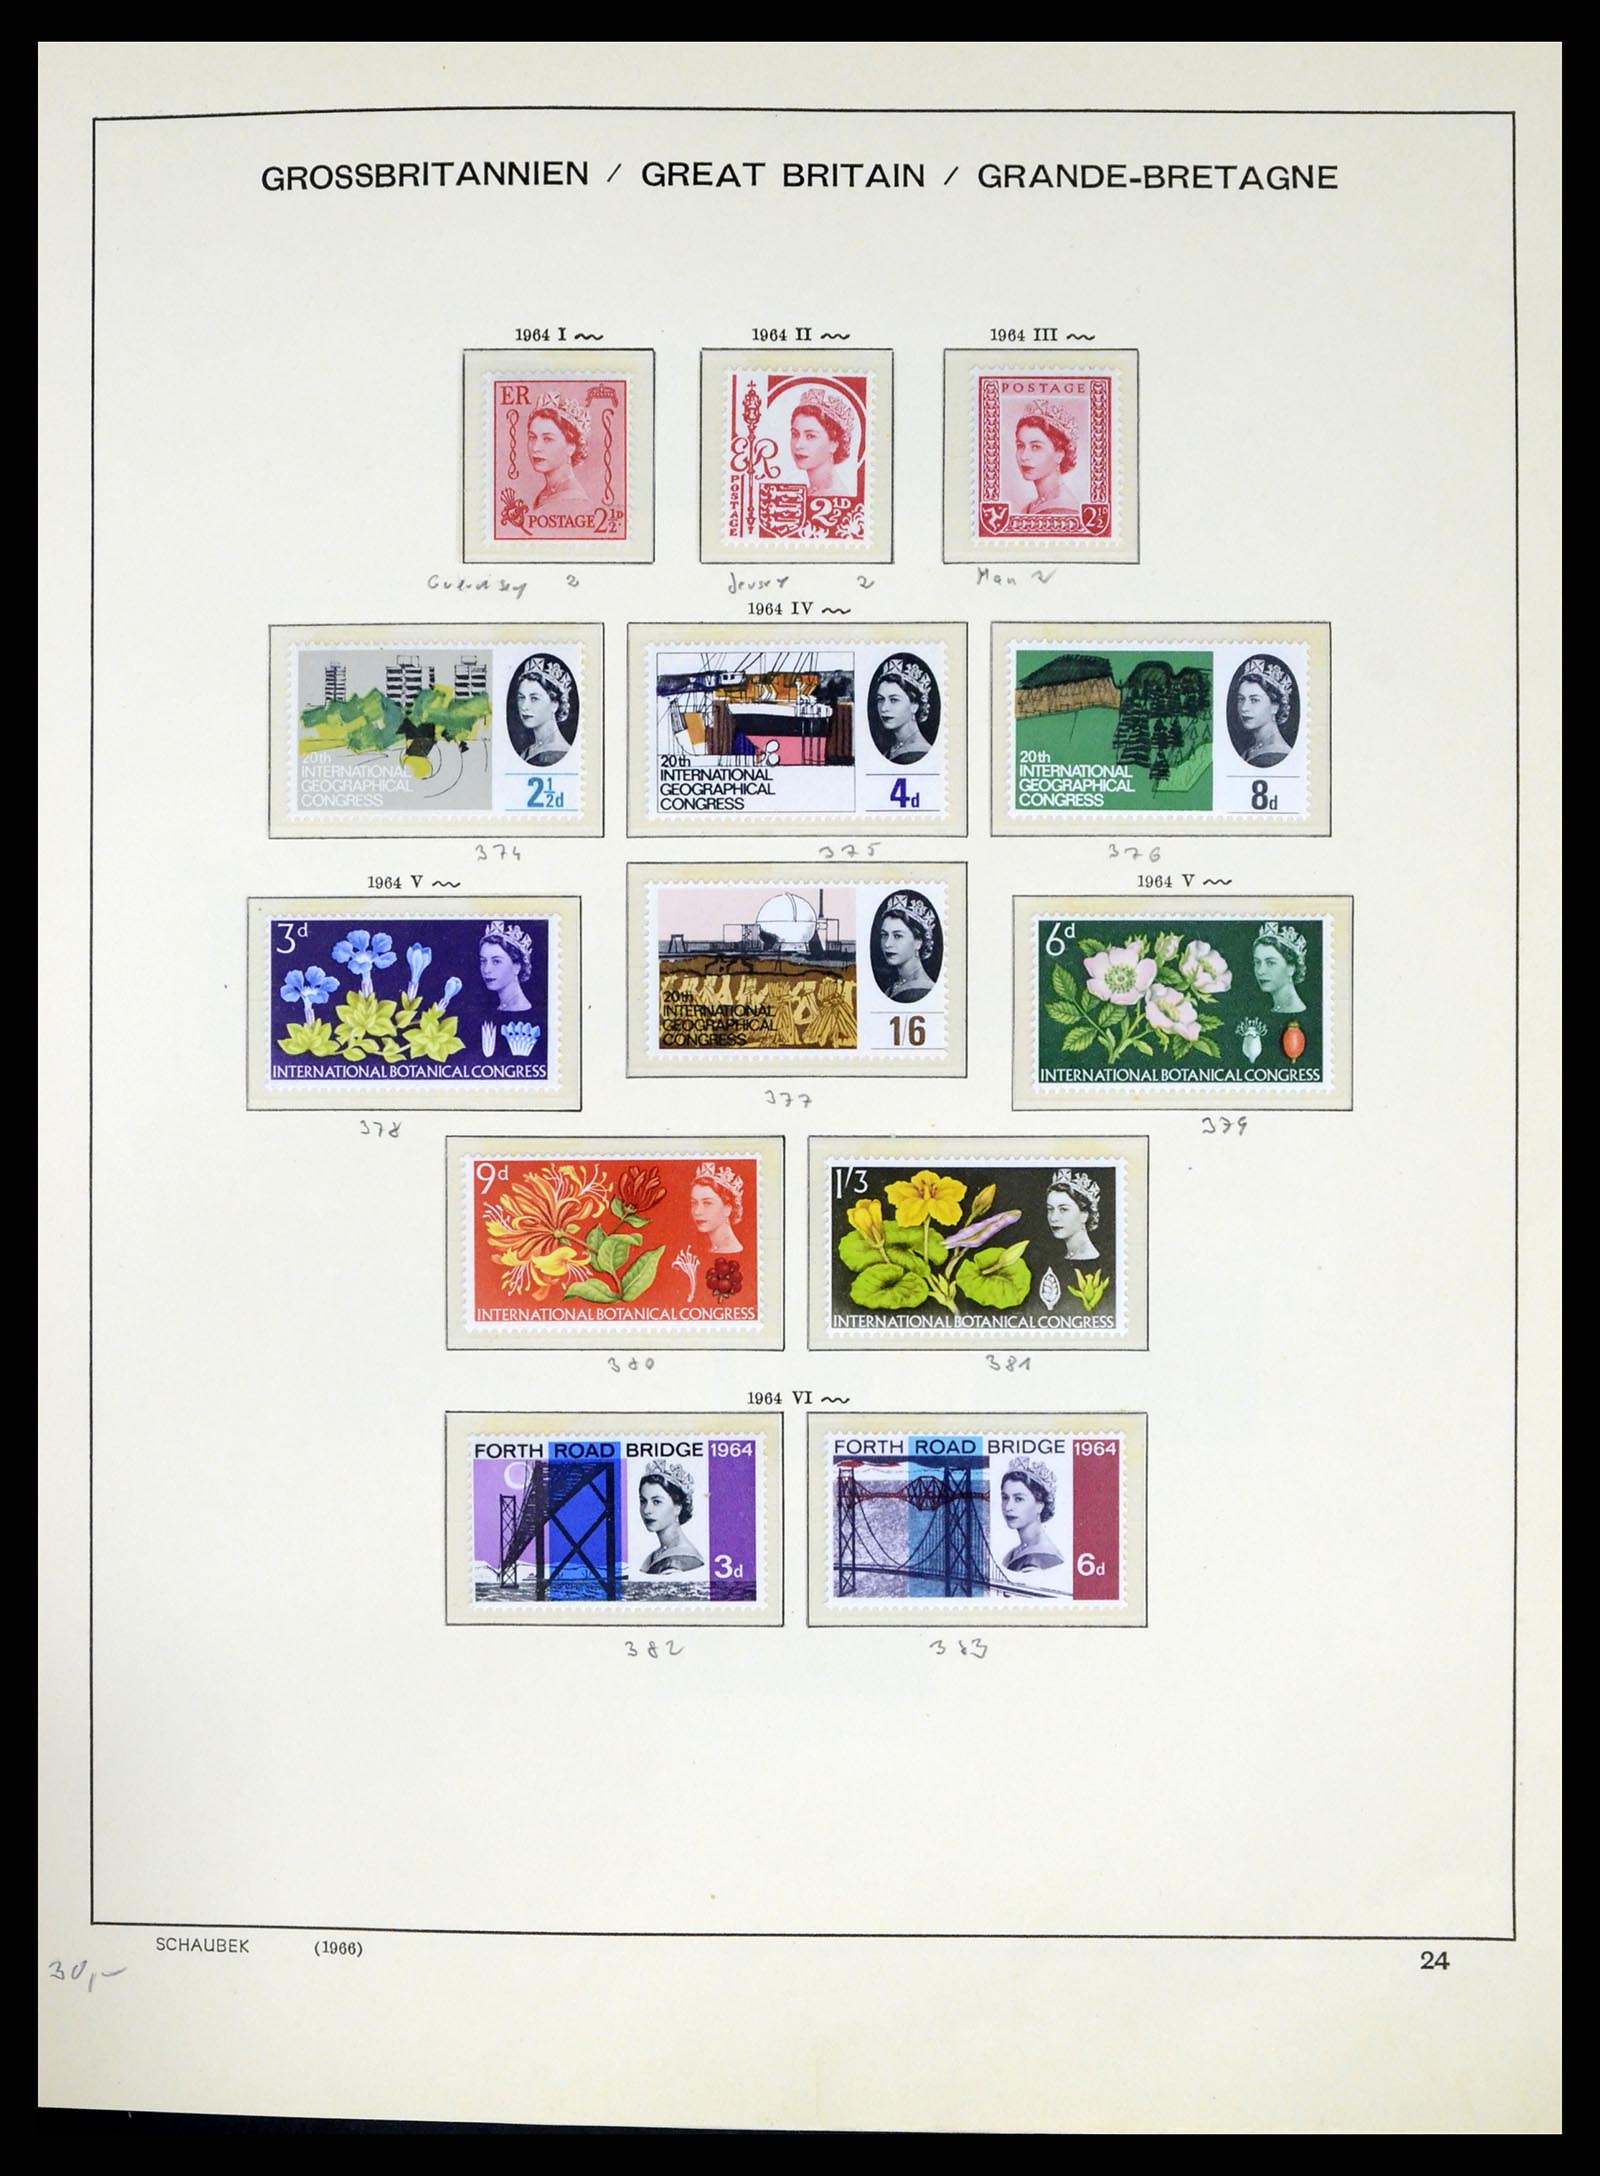 37310 029 - Stamp collection 37310 Great Britain 1840-1988.